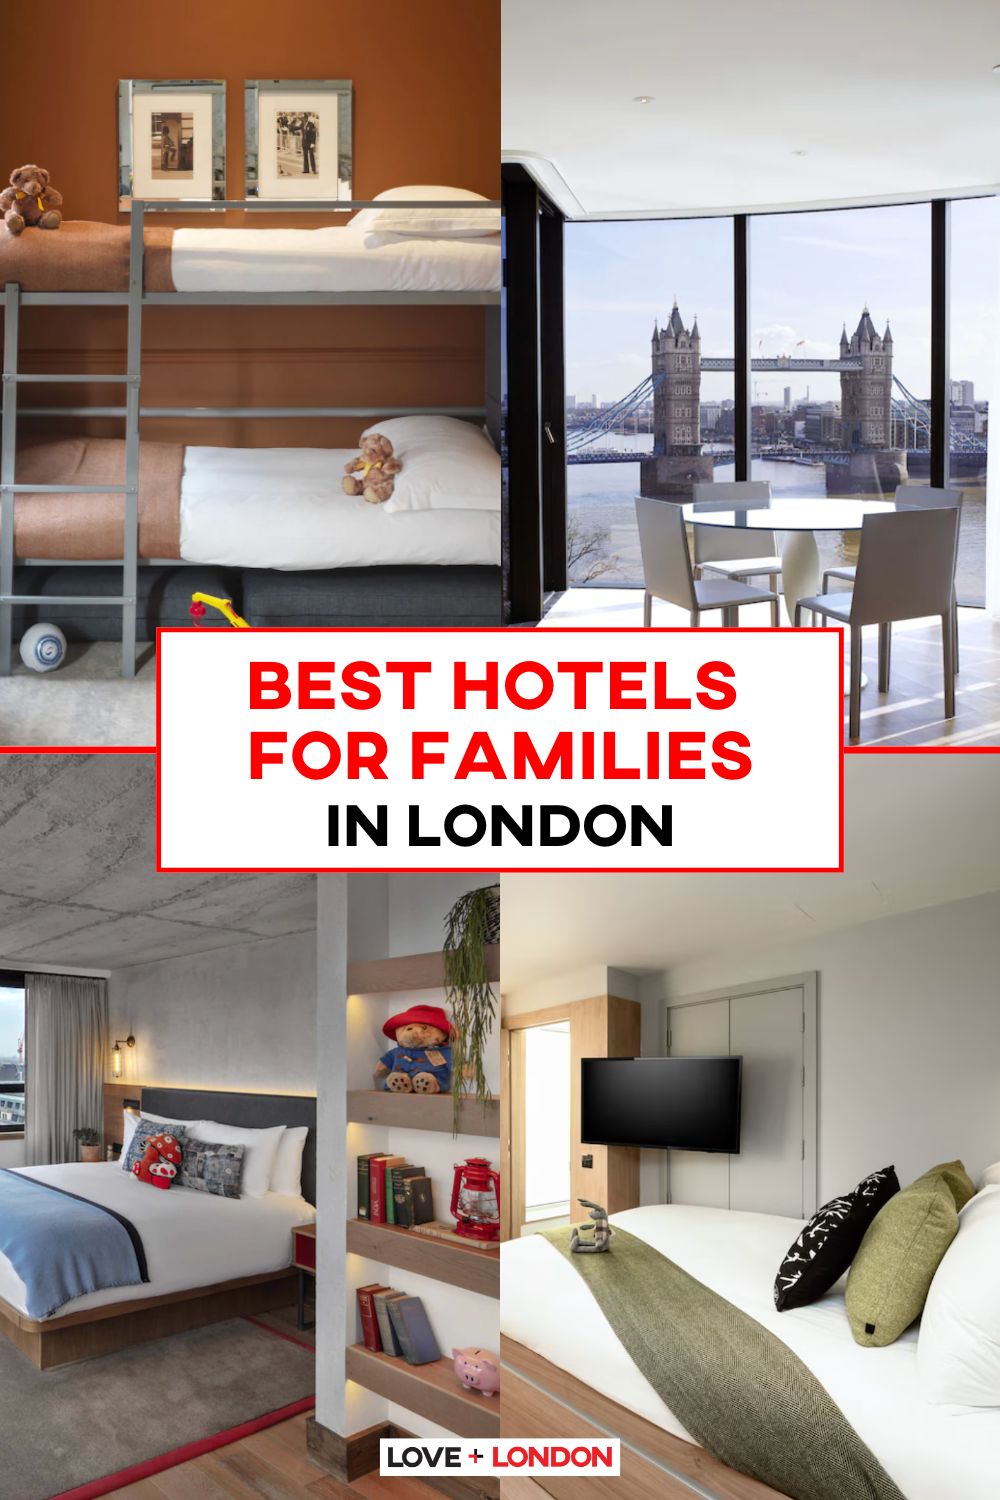 This is an image of a Pinterest pin detailing the Best Hotels for Families in London.